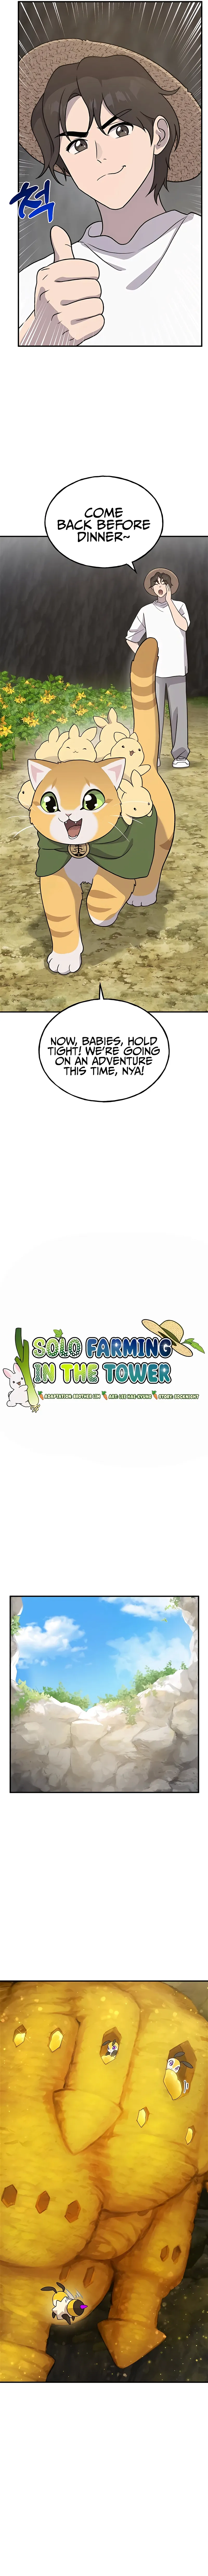 Solo Farming In The Tower Chapter 31 page 5